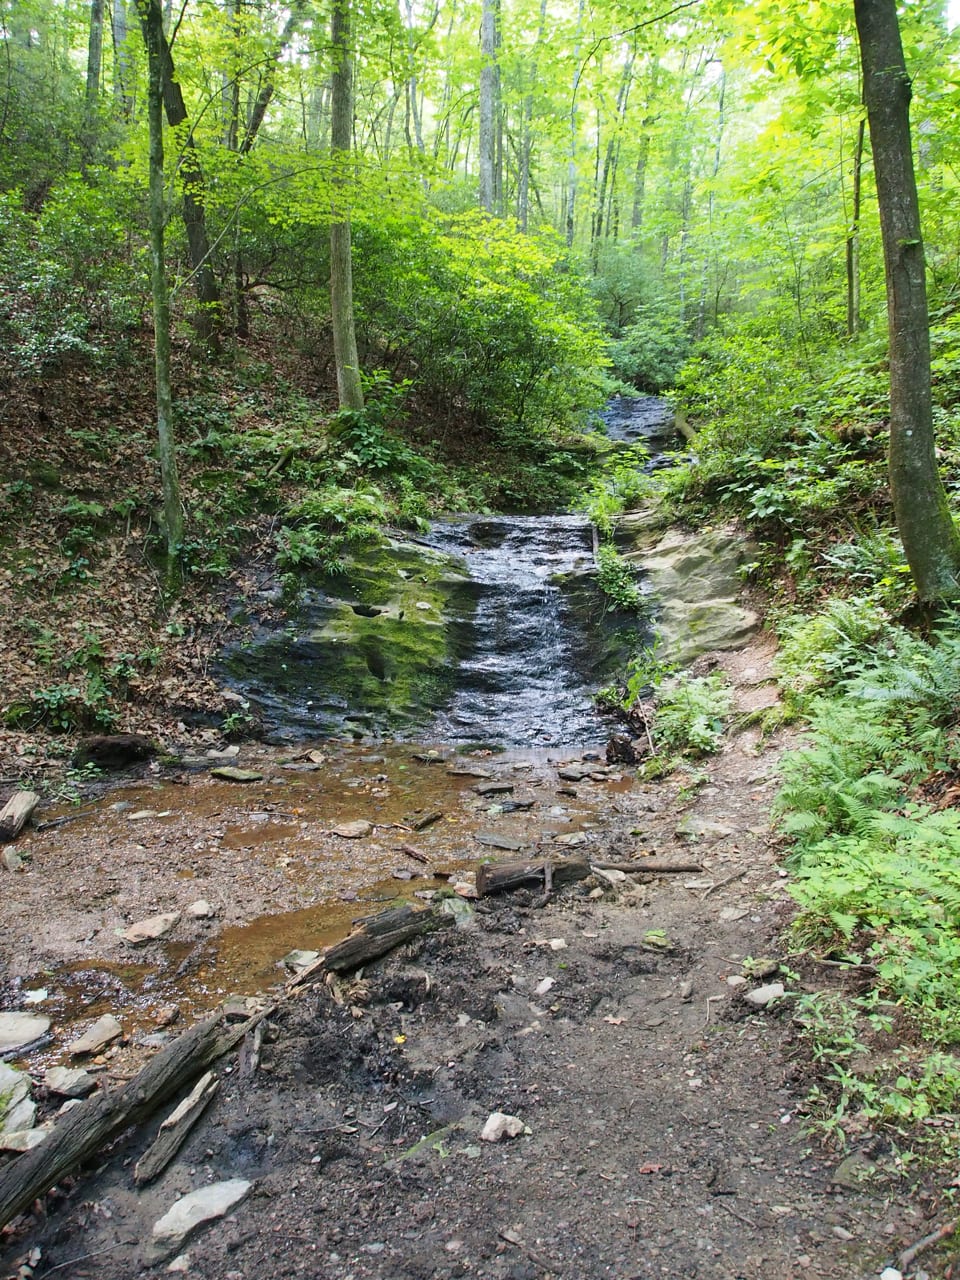 A waterfall along one of the hiking trails.